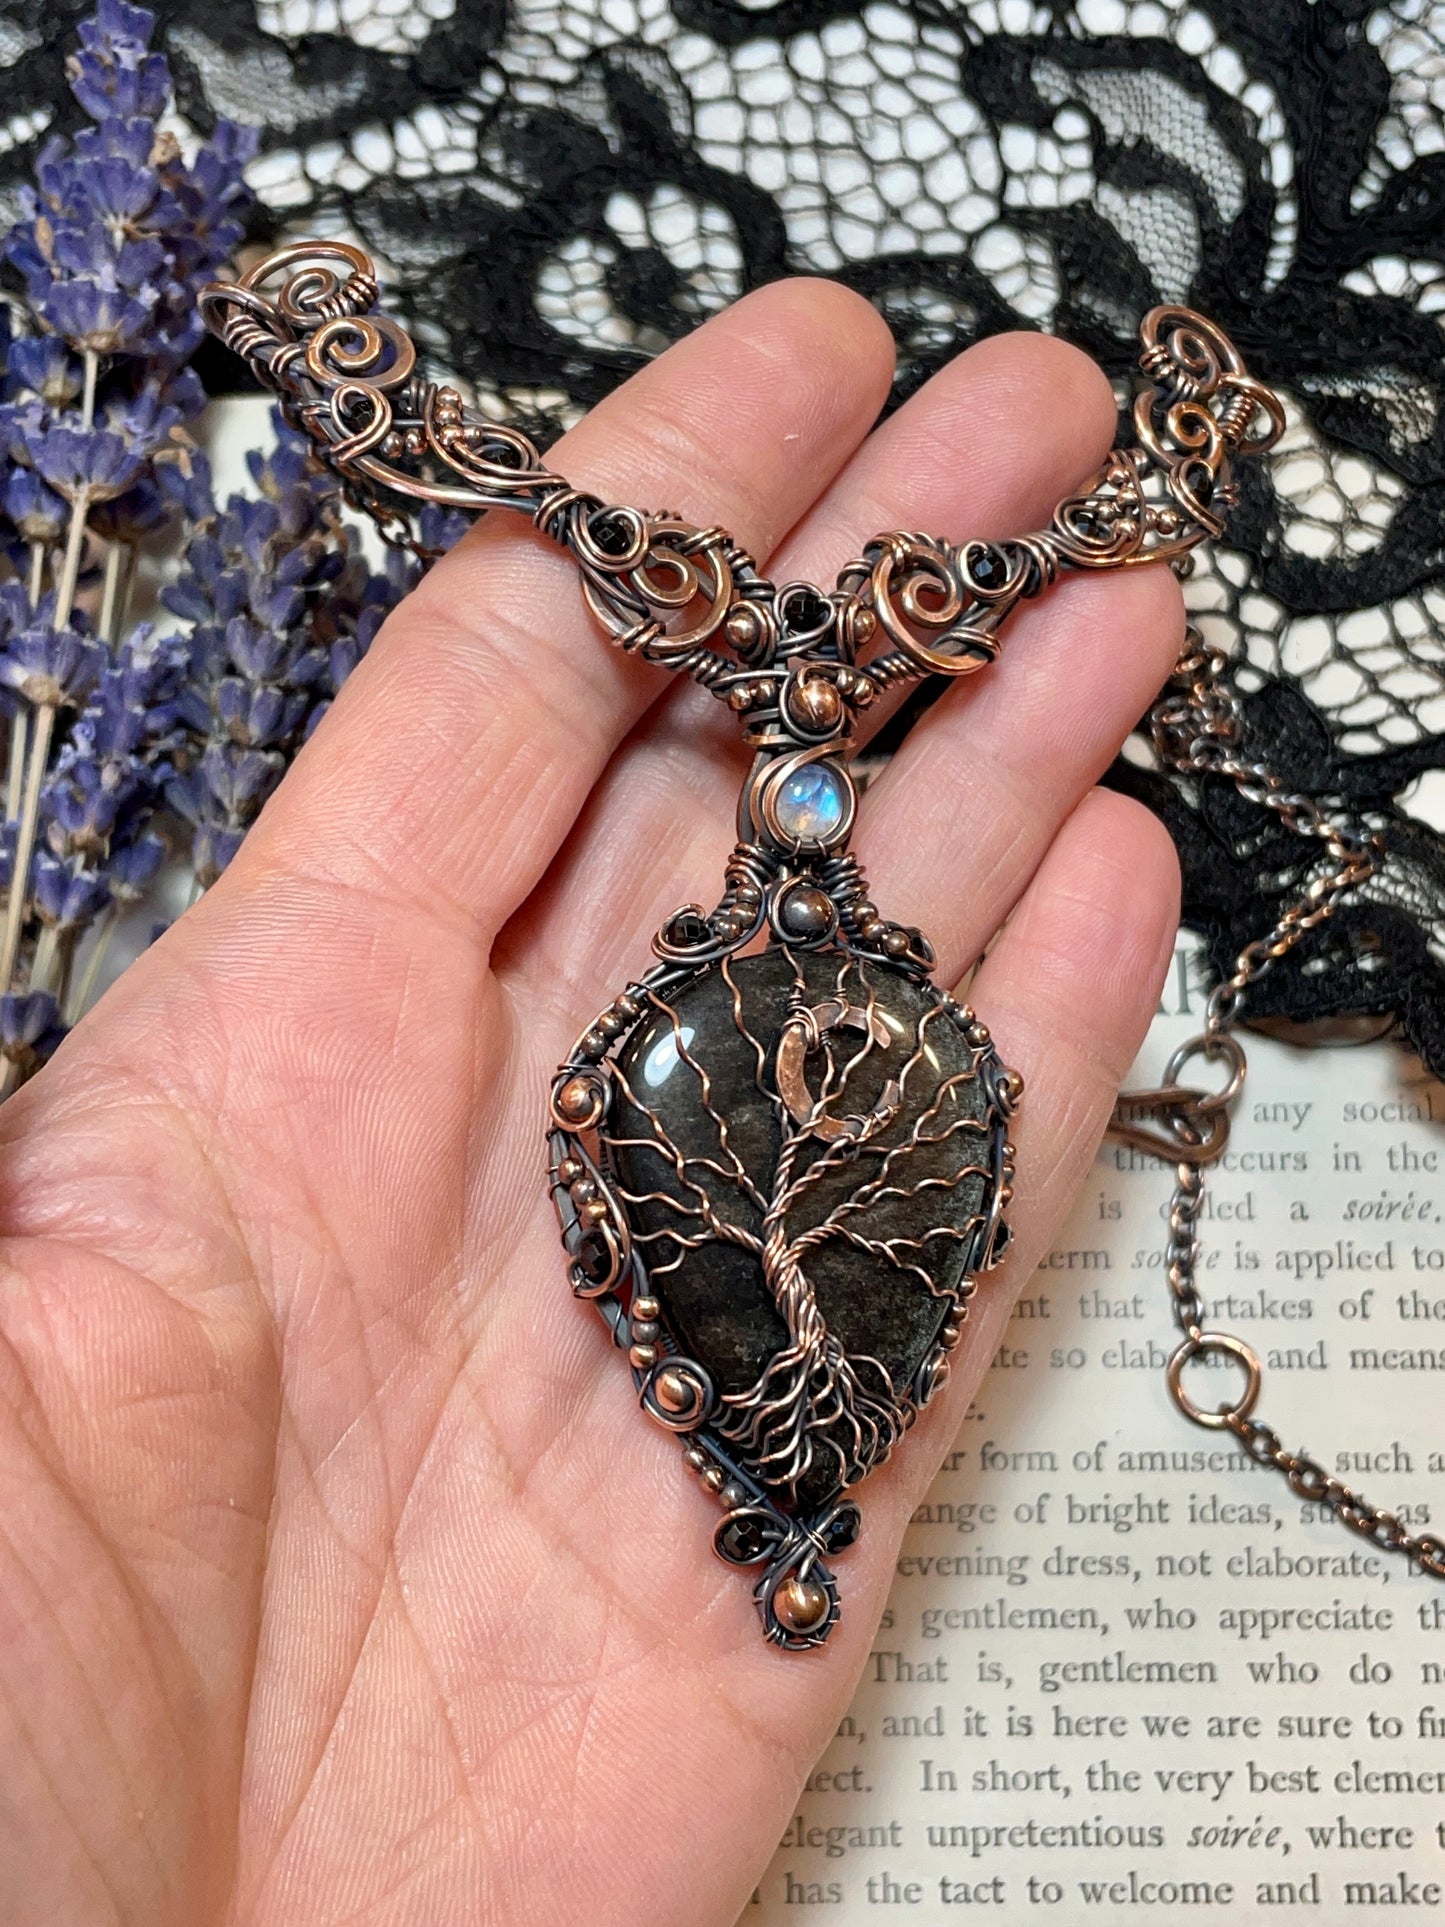 Silver Sheen Obsidian Tree of Life Collar Amulet (Crescent Moon) in Copper